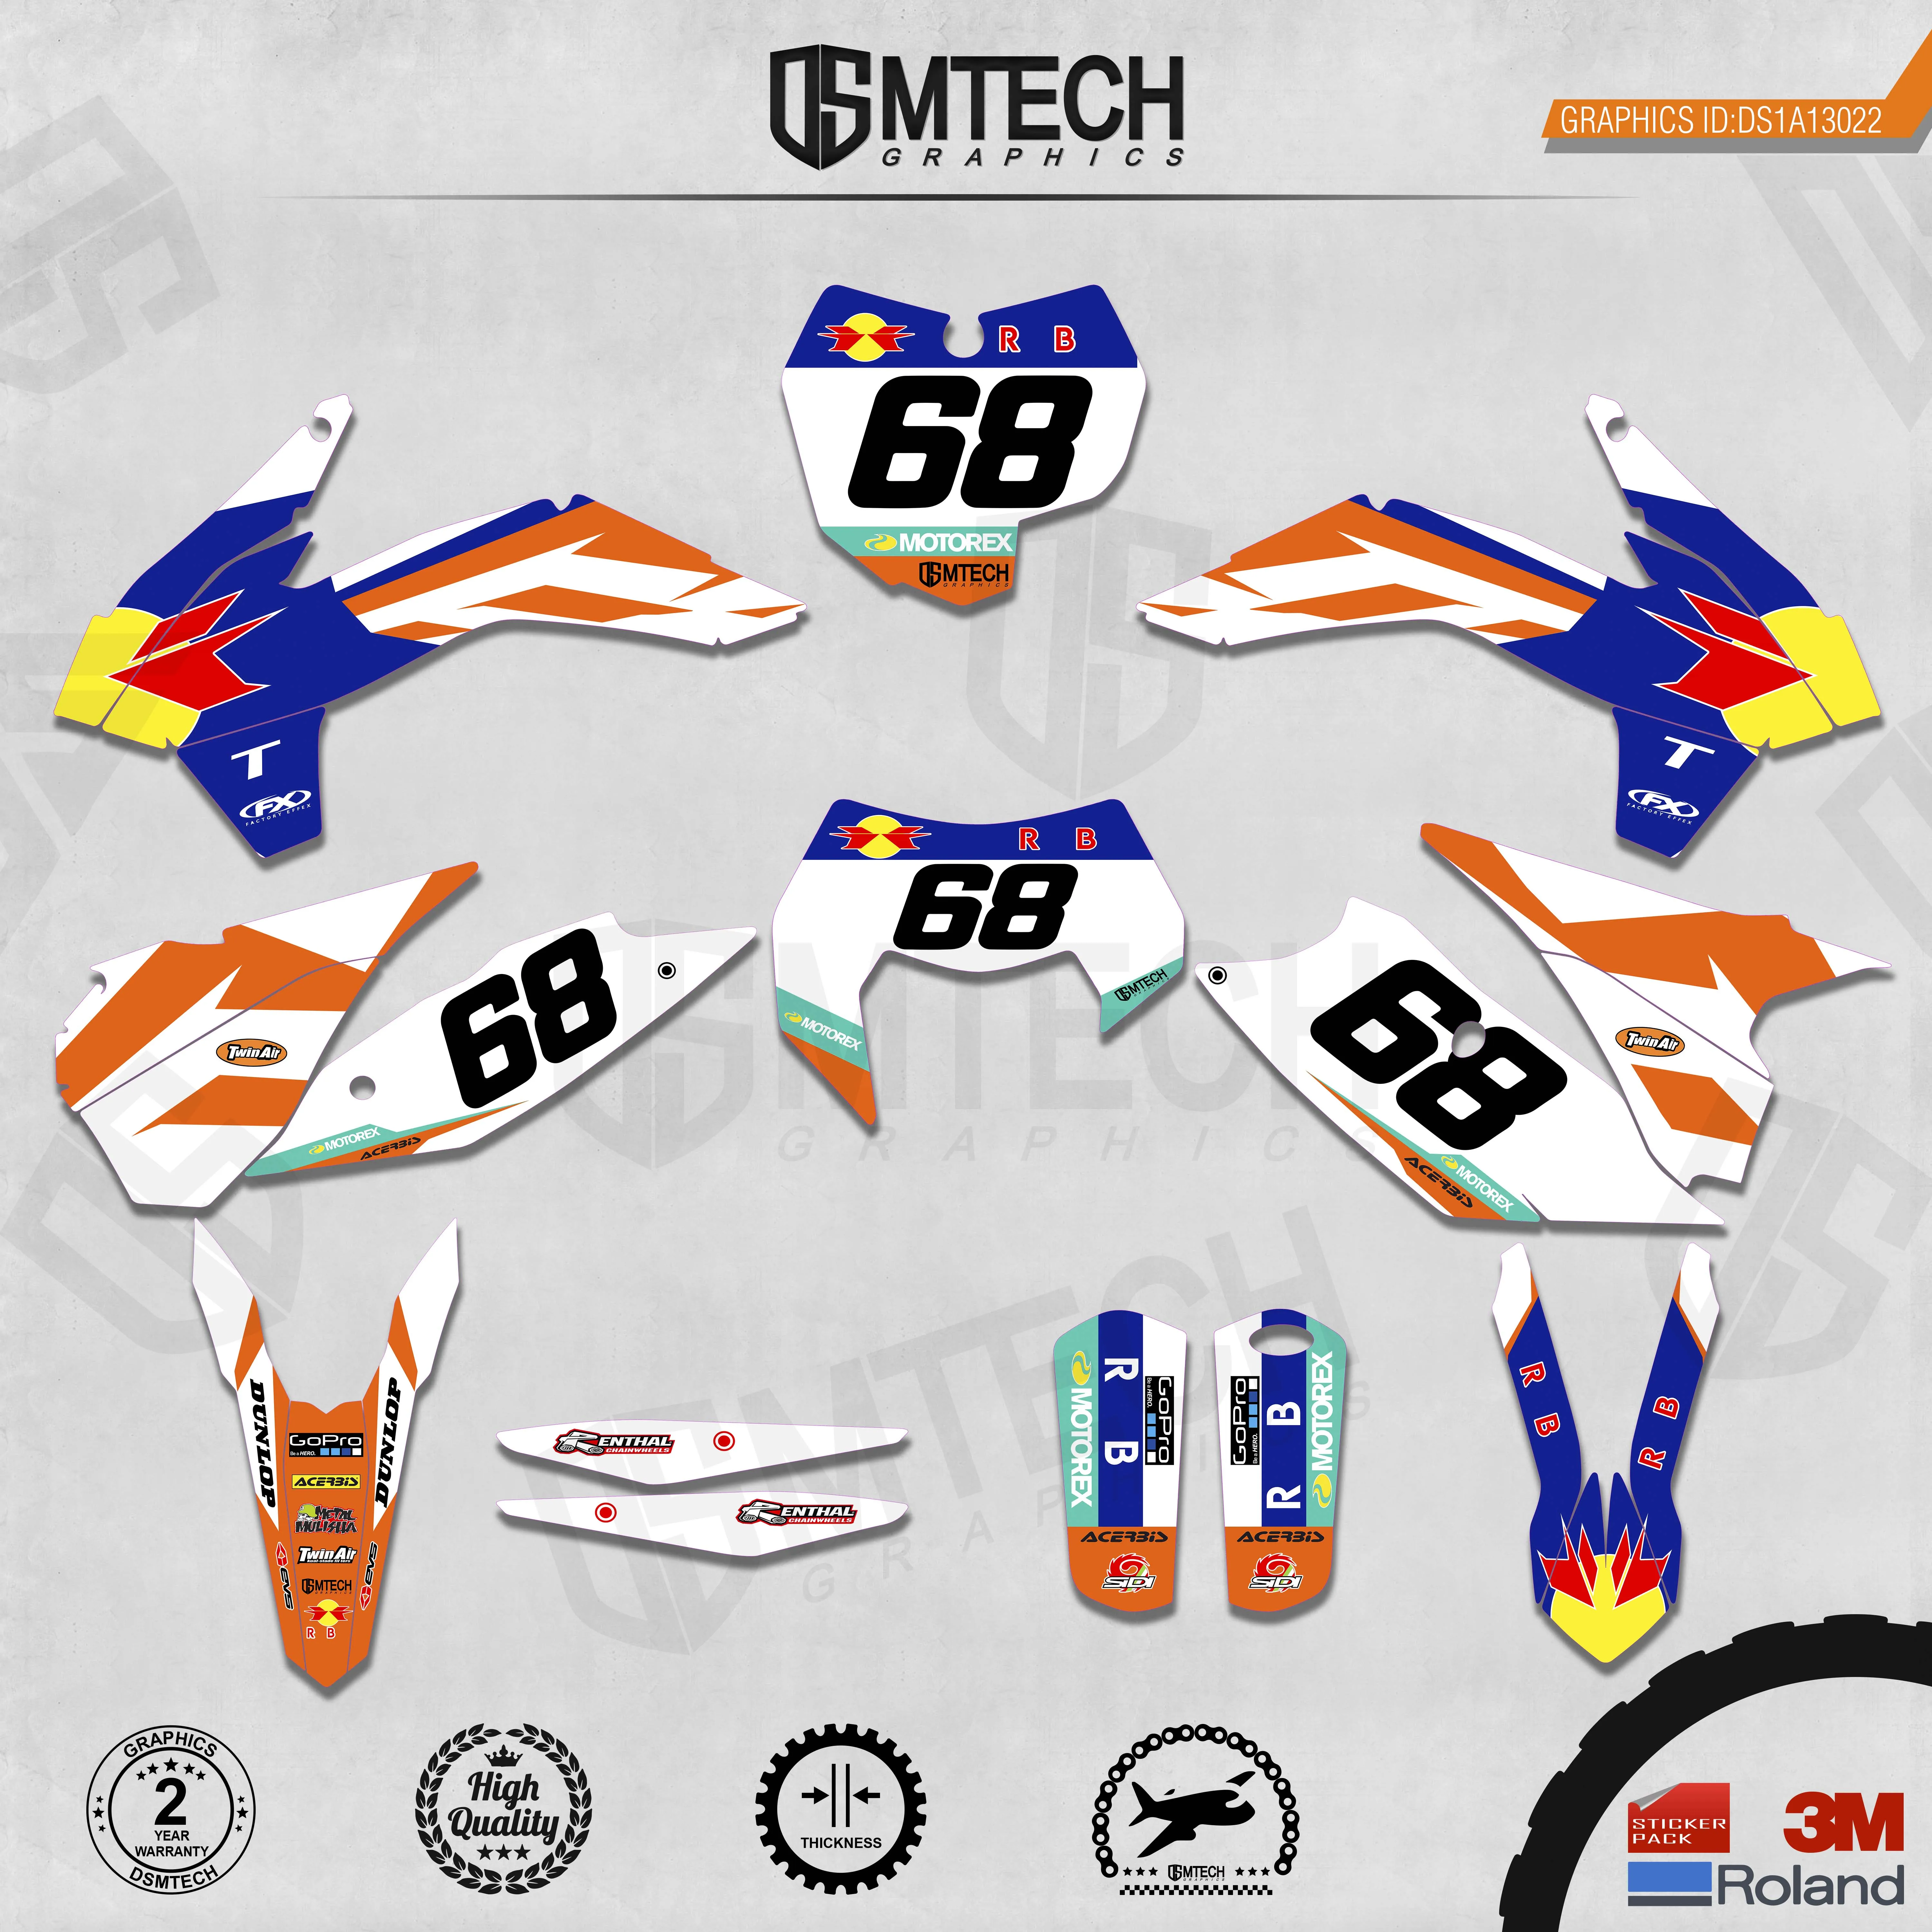 DSMTECH Customized Team Graphics Backgrounds Decals 3M Custom Stickers For 2013-2014 SXF 2015 SXF 2014-2015 EXC 2016 EXC  022